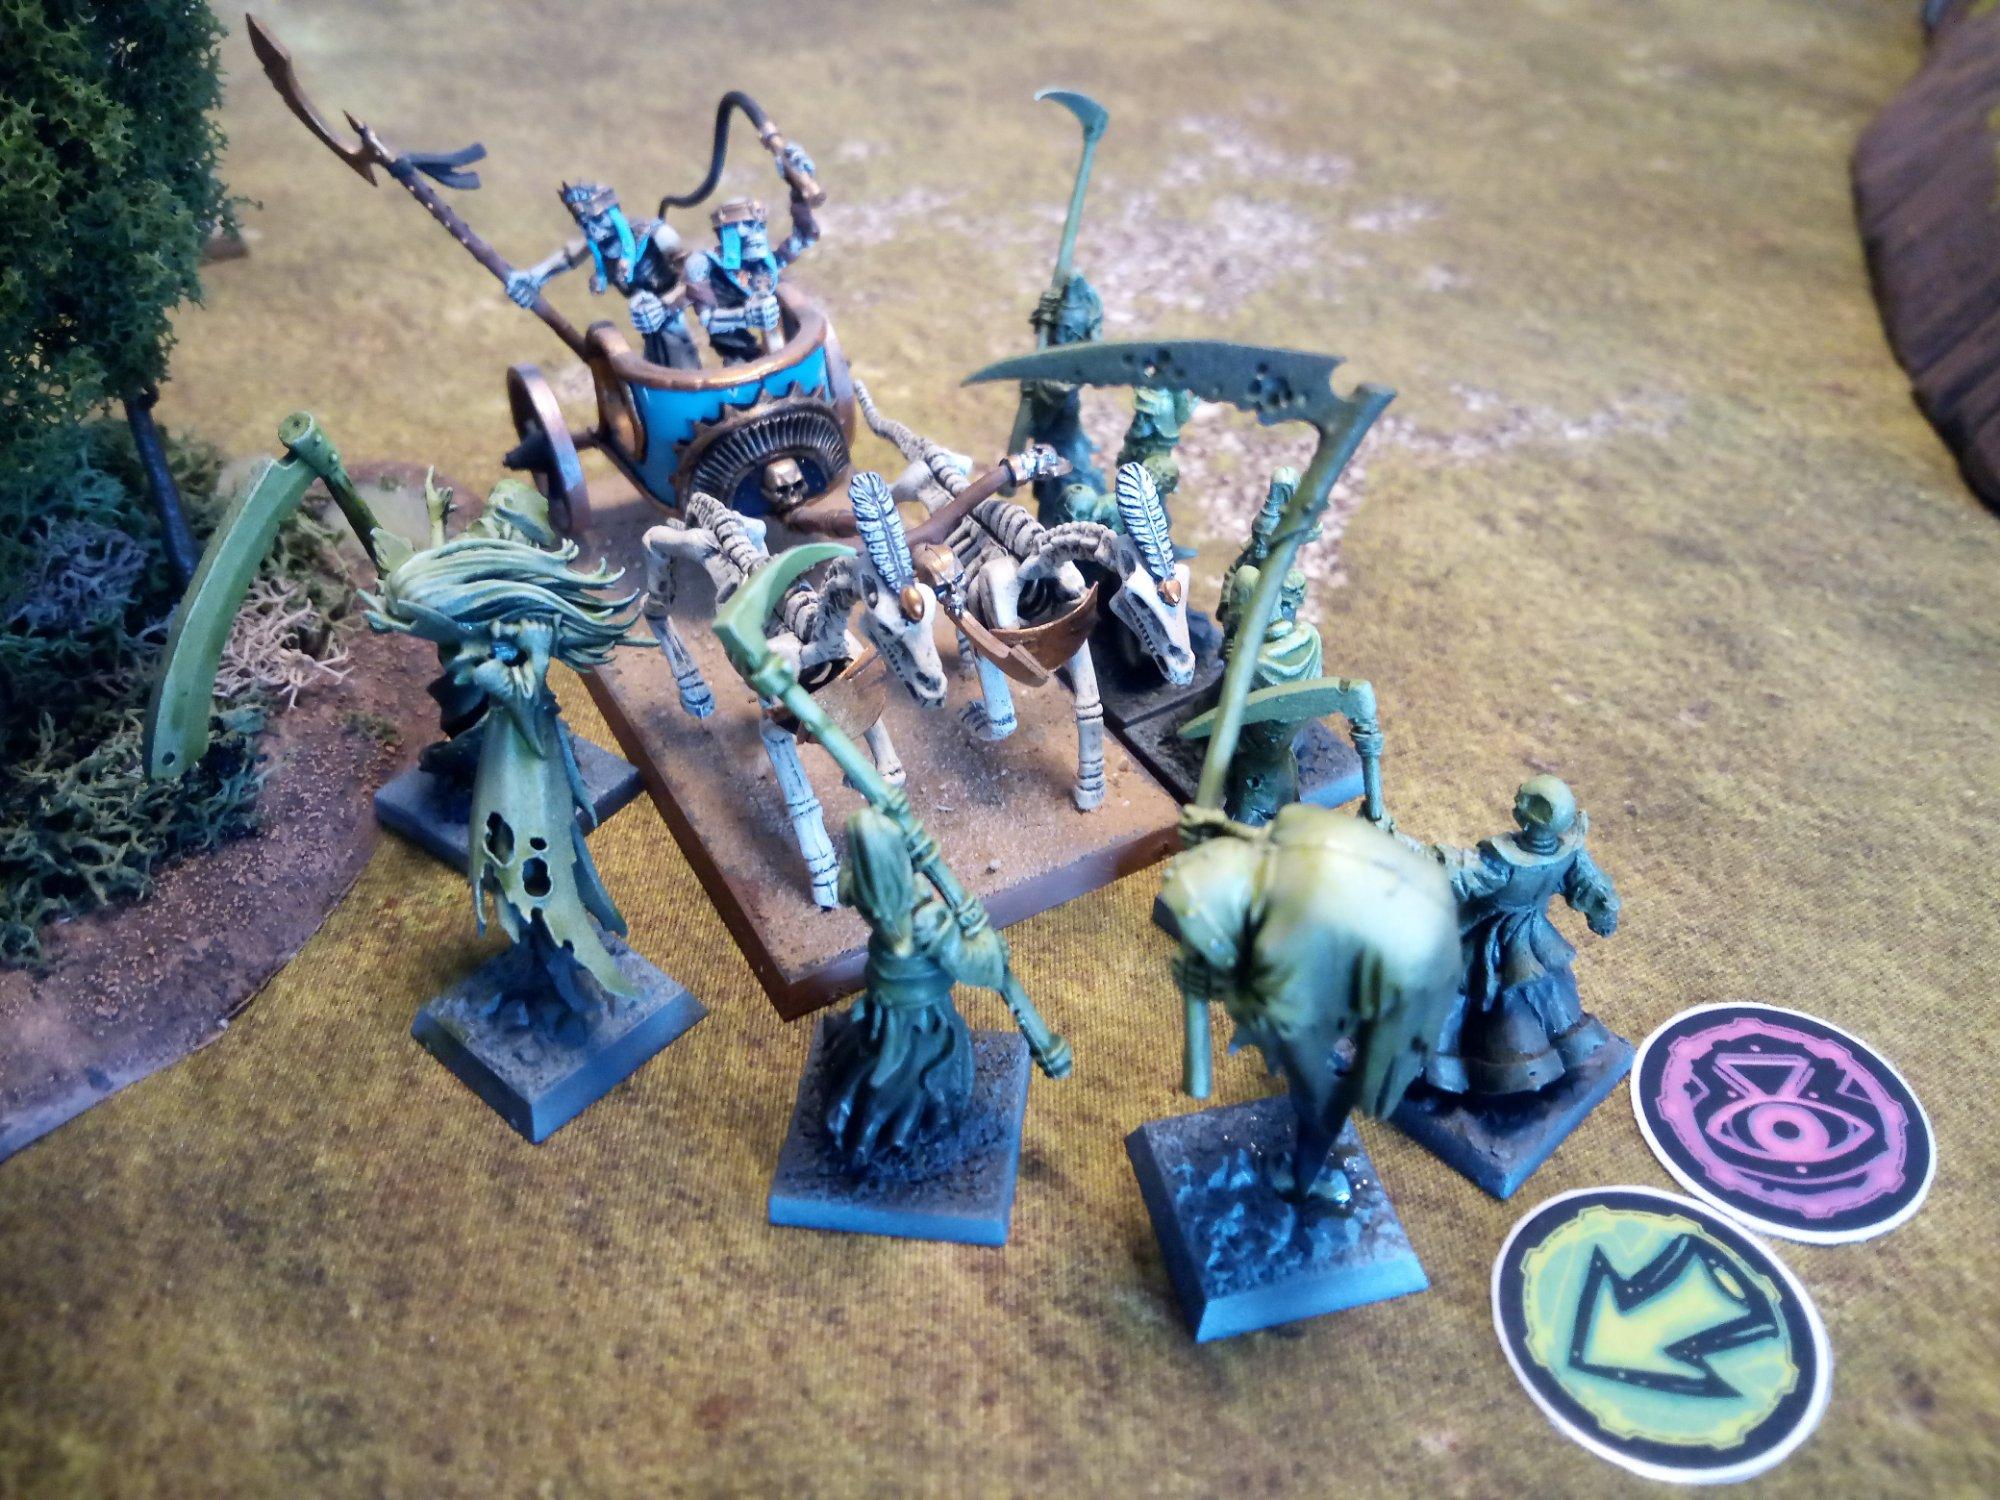 Vampiric Undead Wraiths charging Mummified Undead chariot in the Danse Macabre scenario for One Page Rules Age of Fantasy.